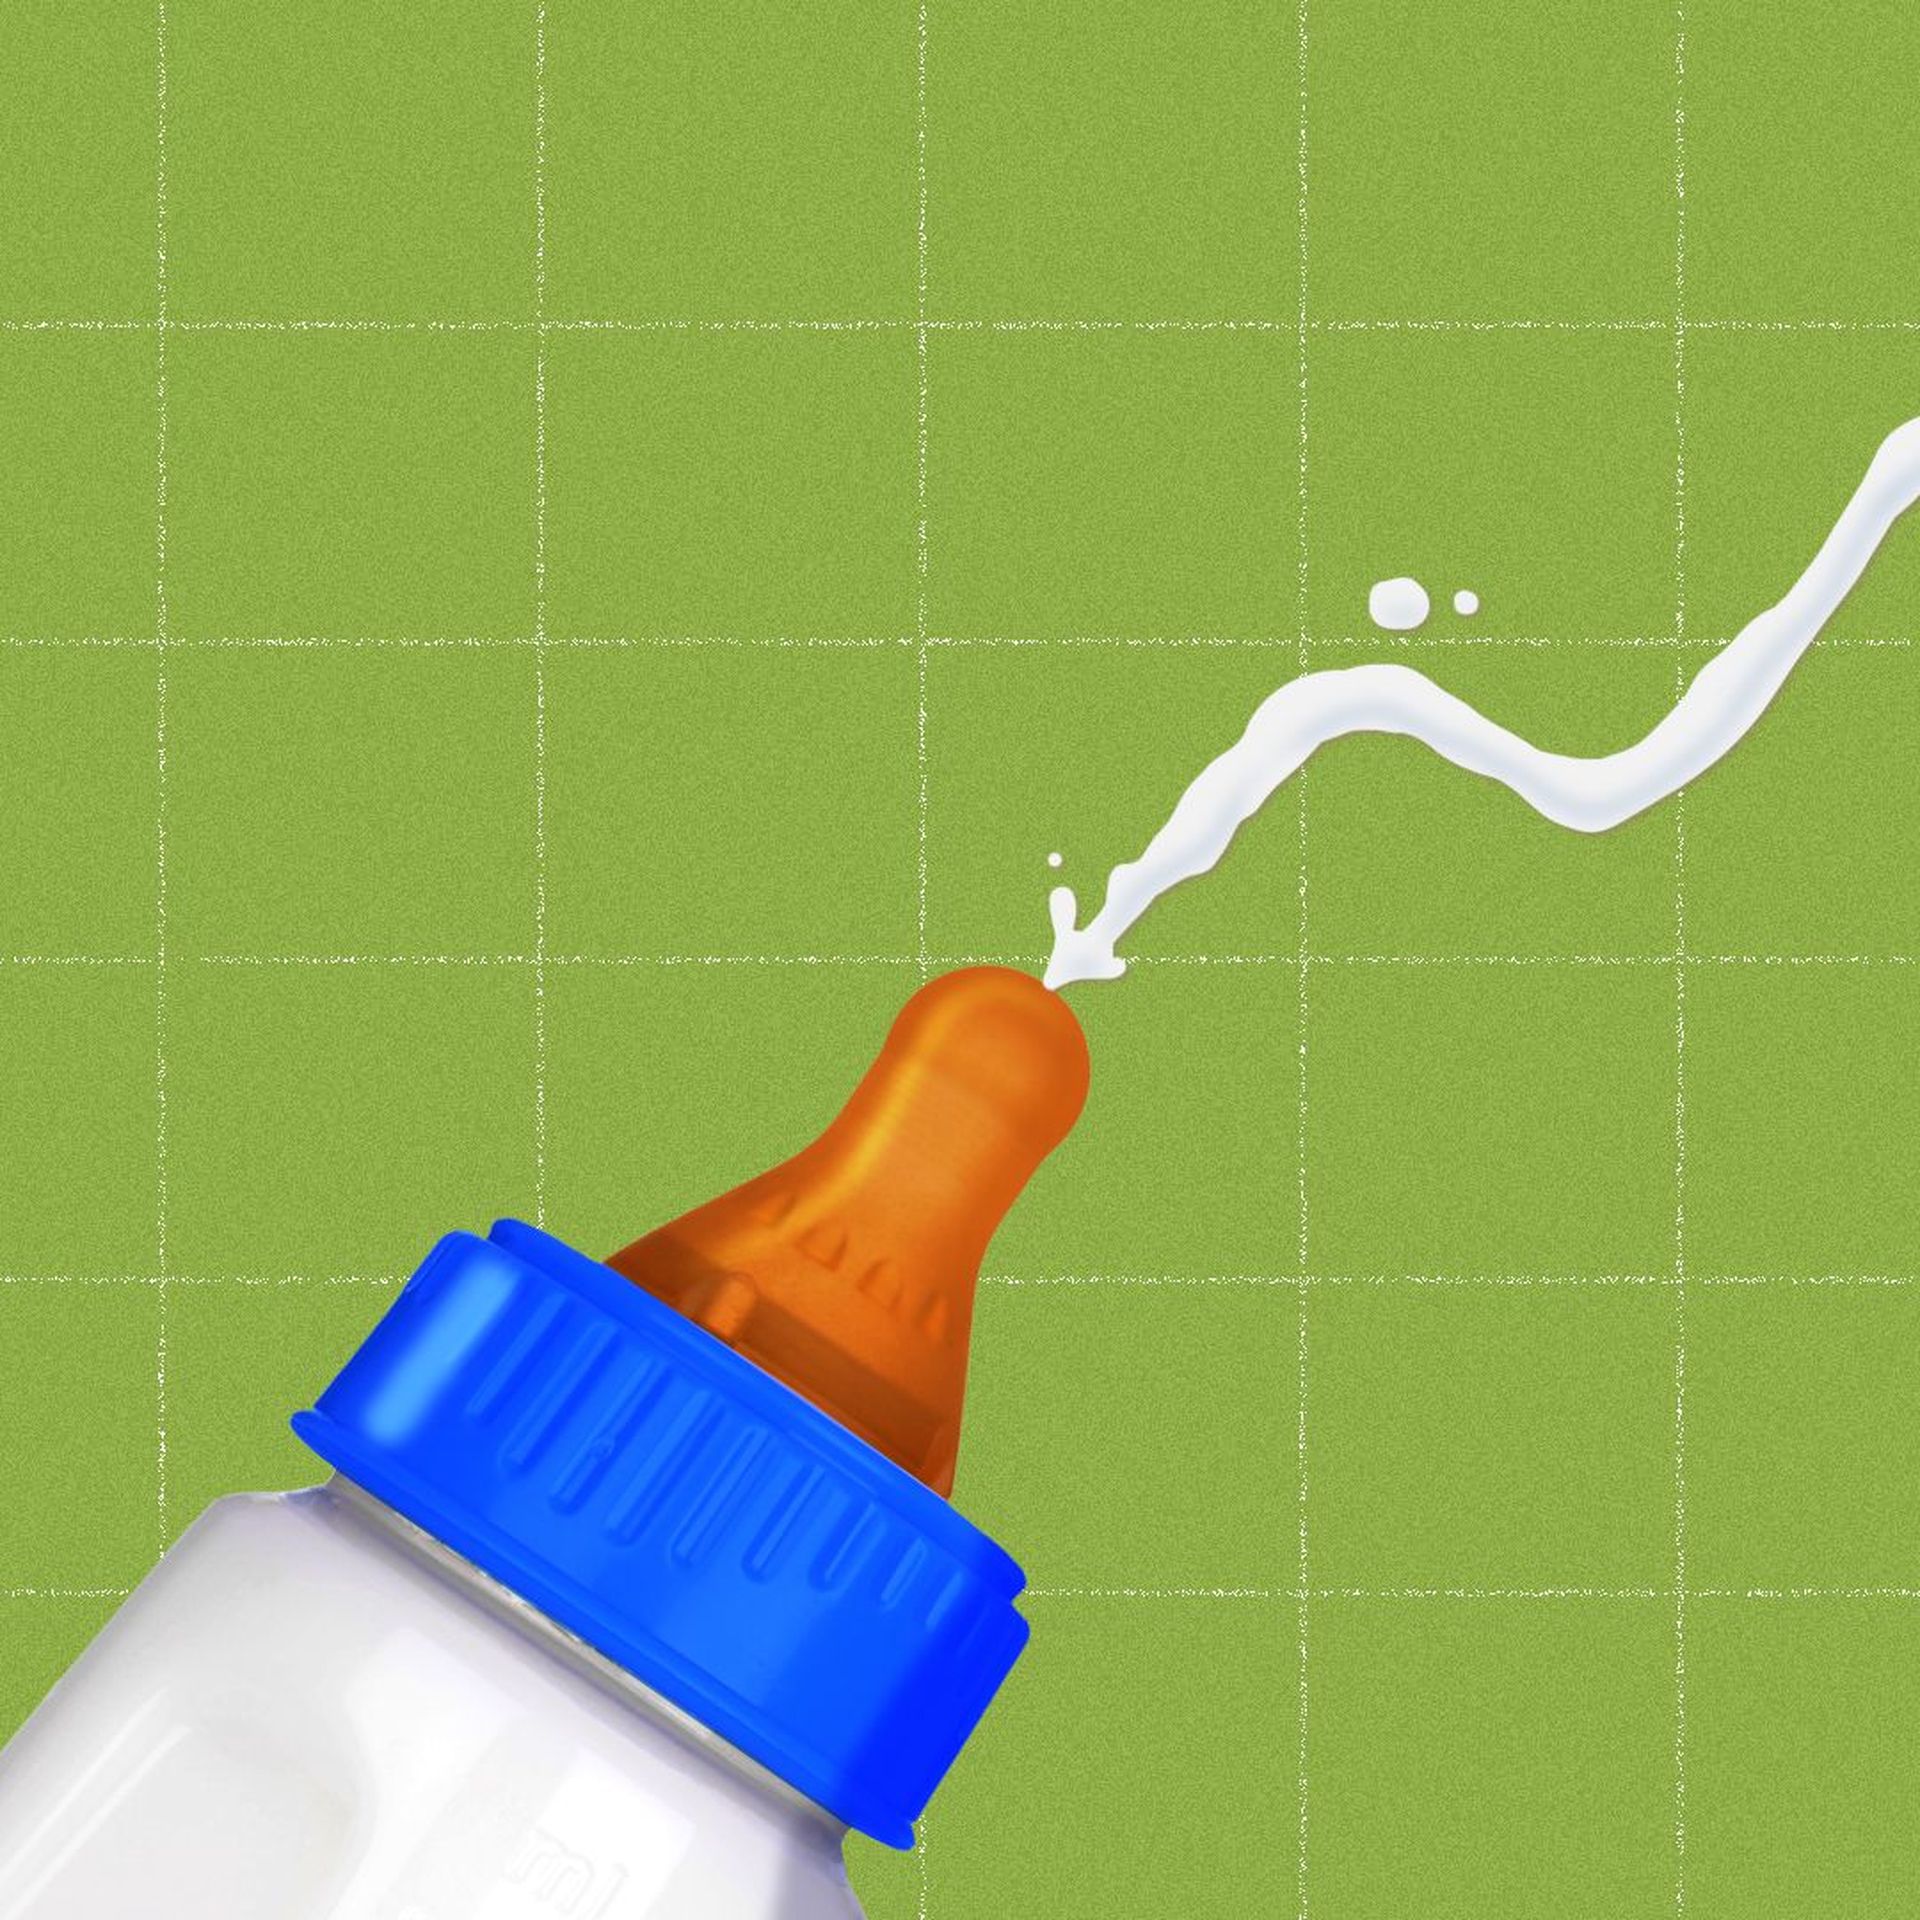 Illustration of milk coming out of a bottle in the shape of an upward trend line